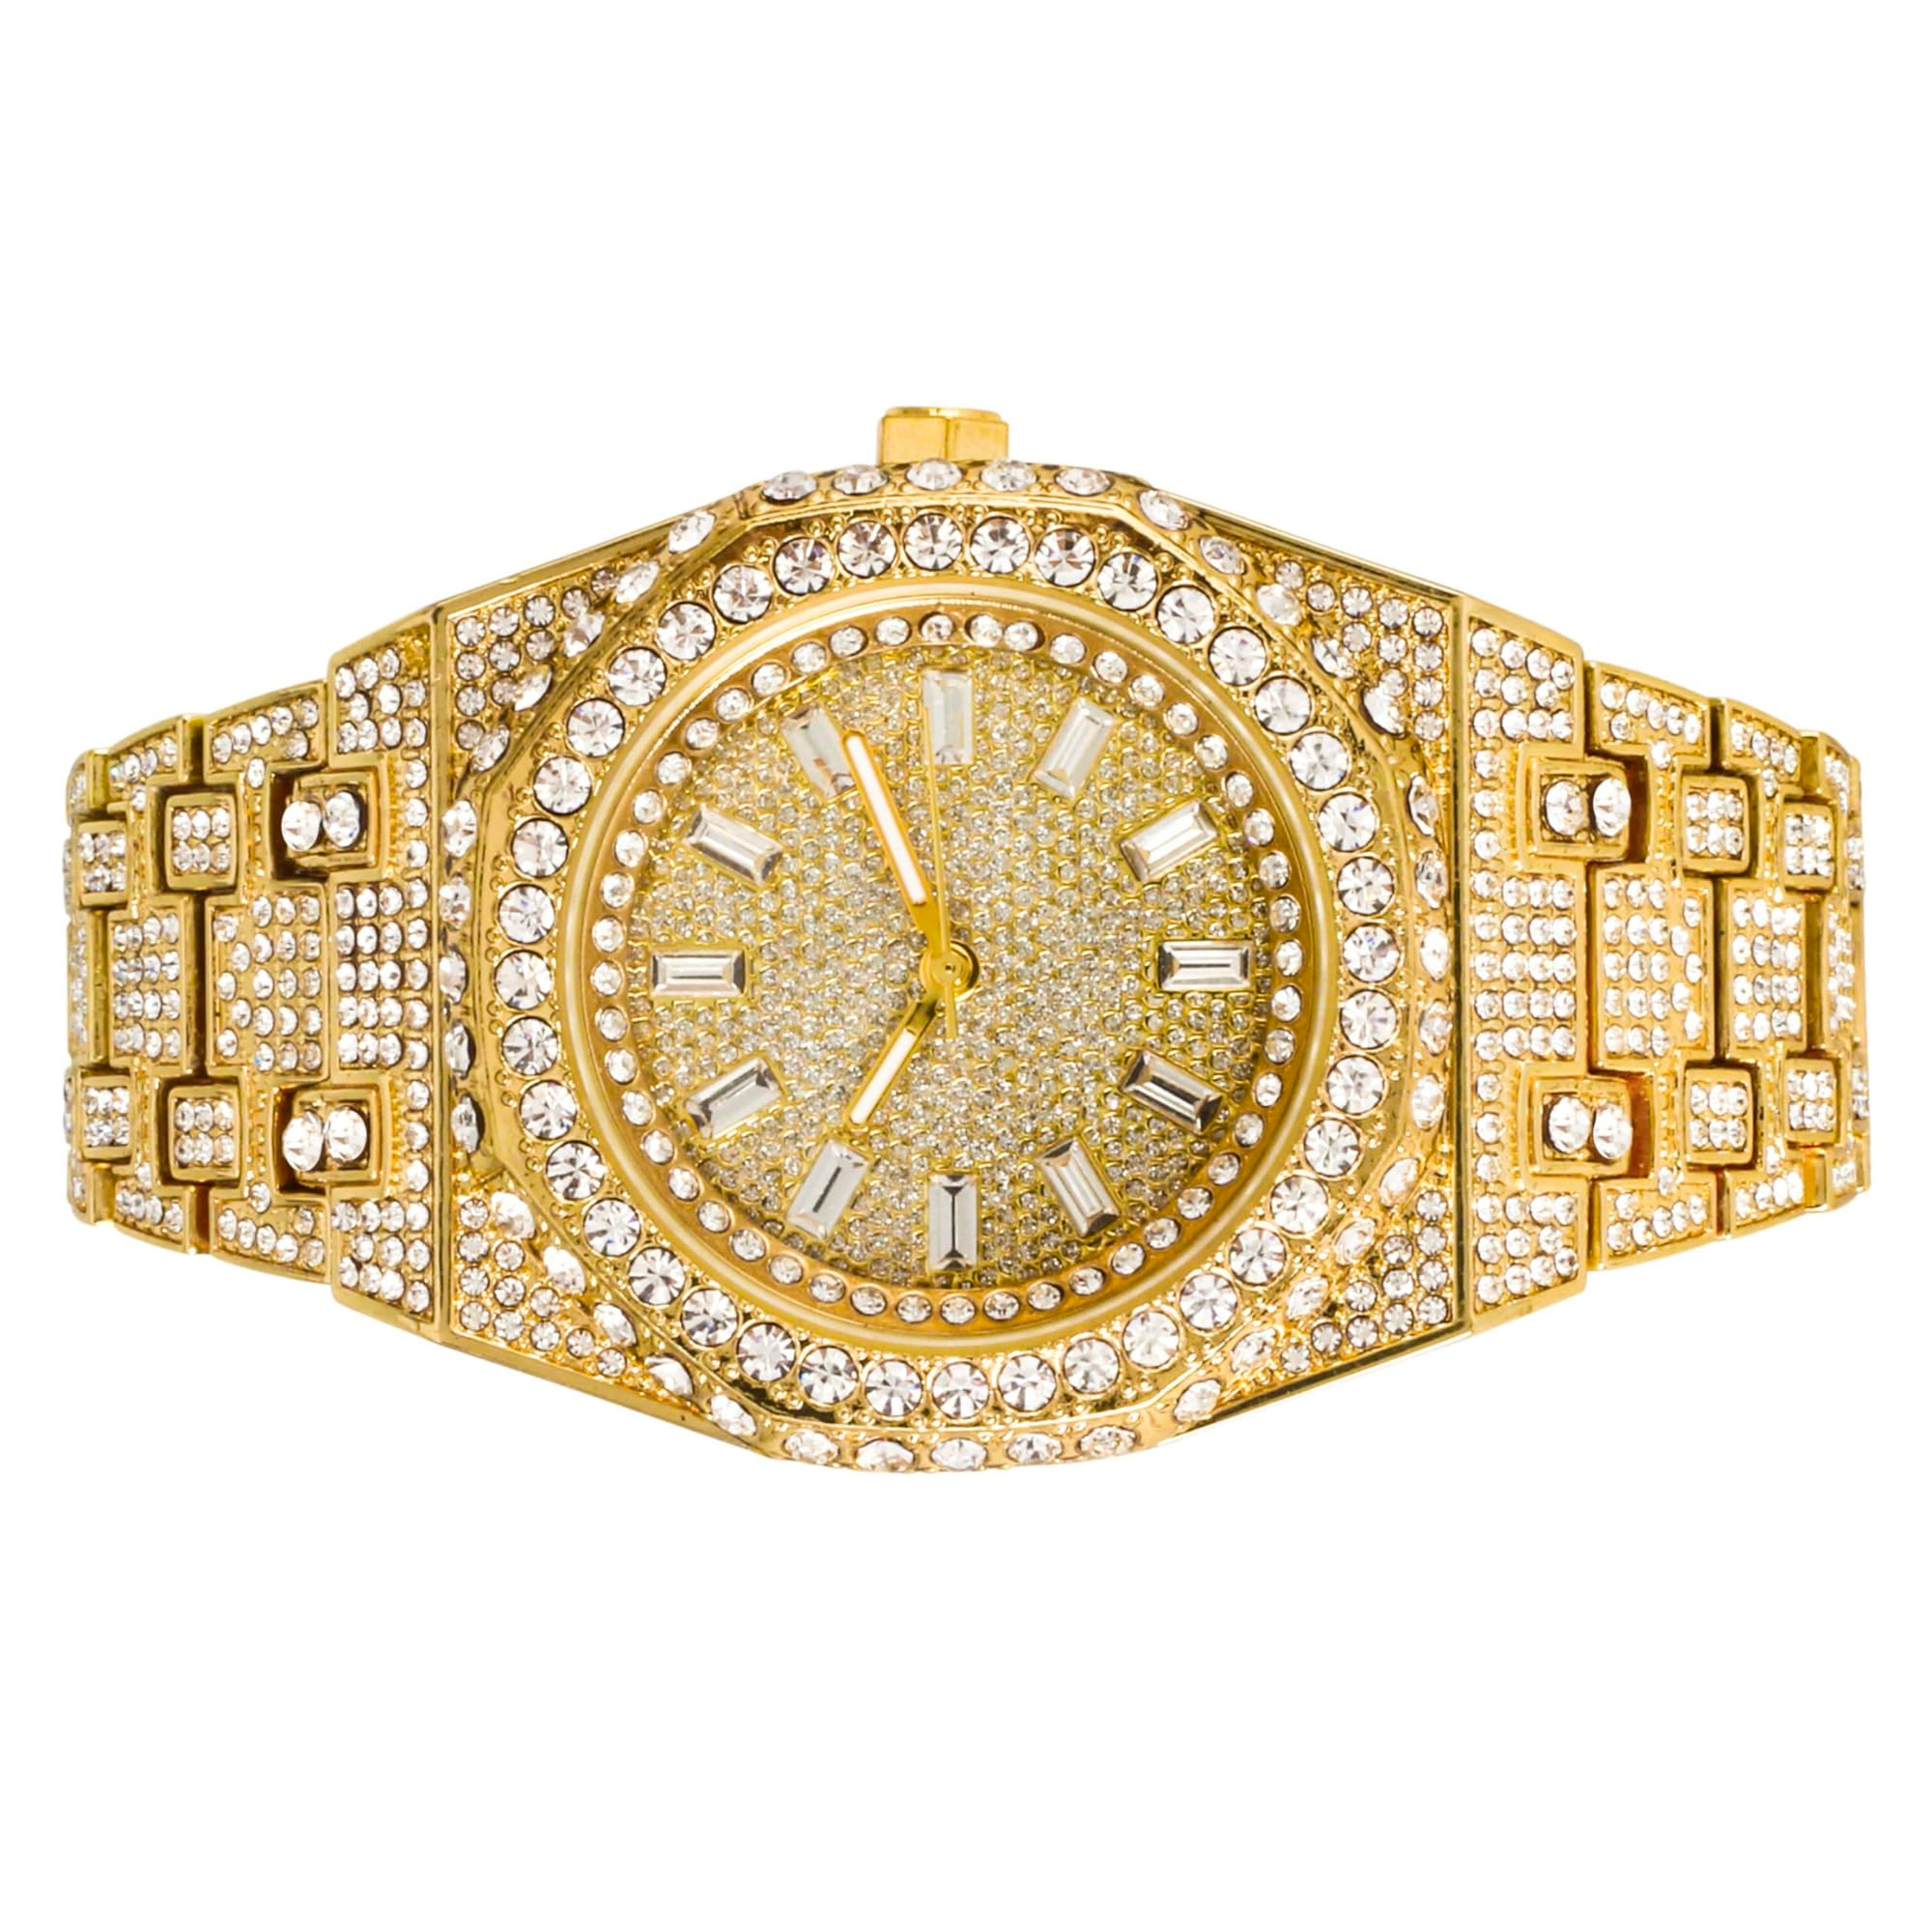 Men's Round Baguette Dial Watch 43mm Gold - "Fully Iced Band"